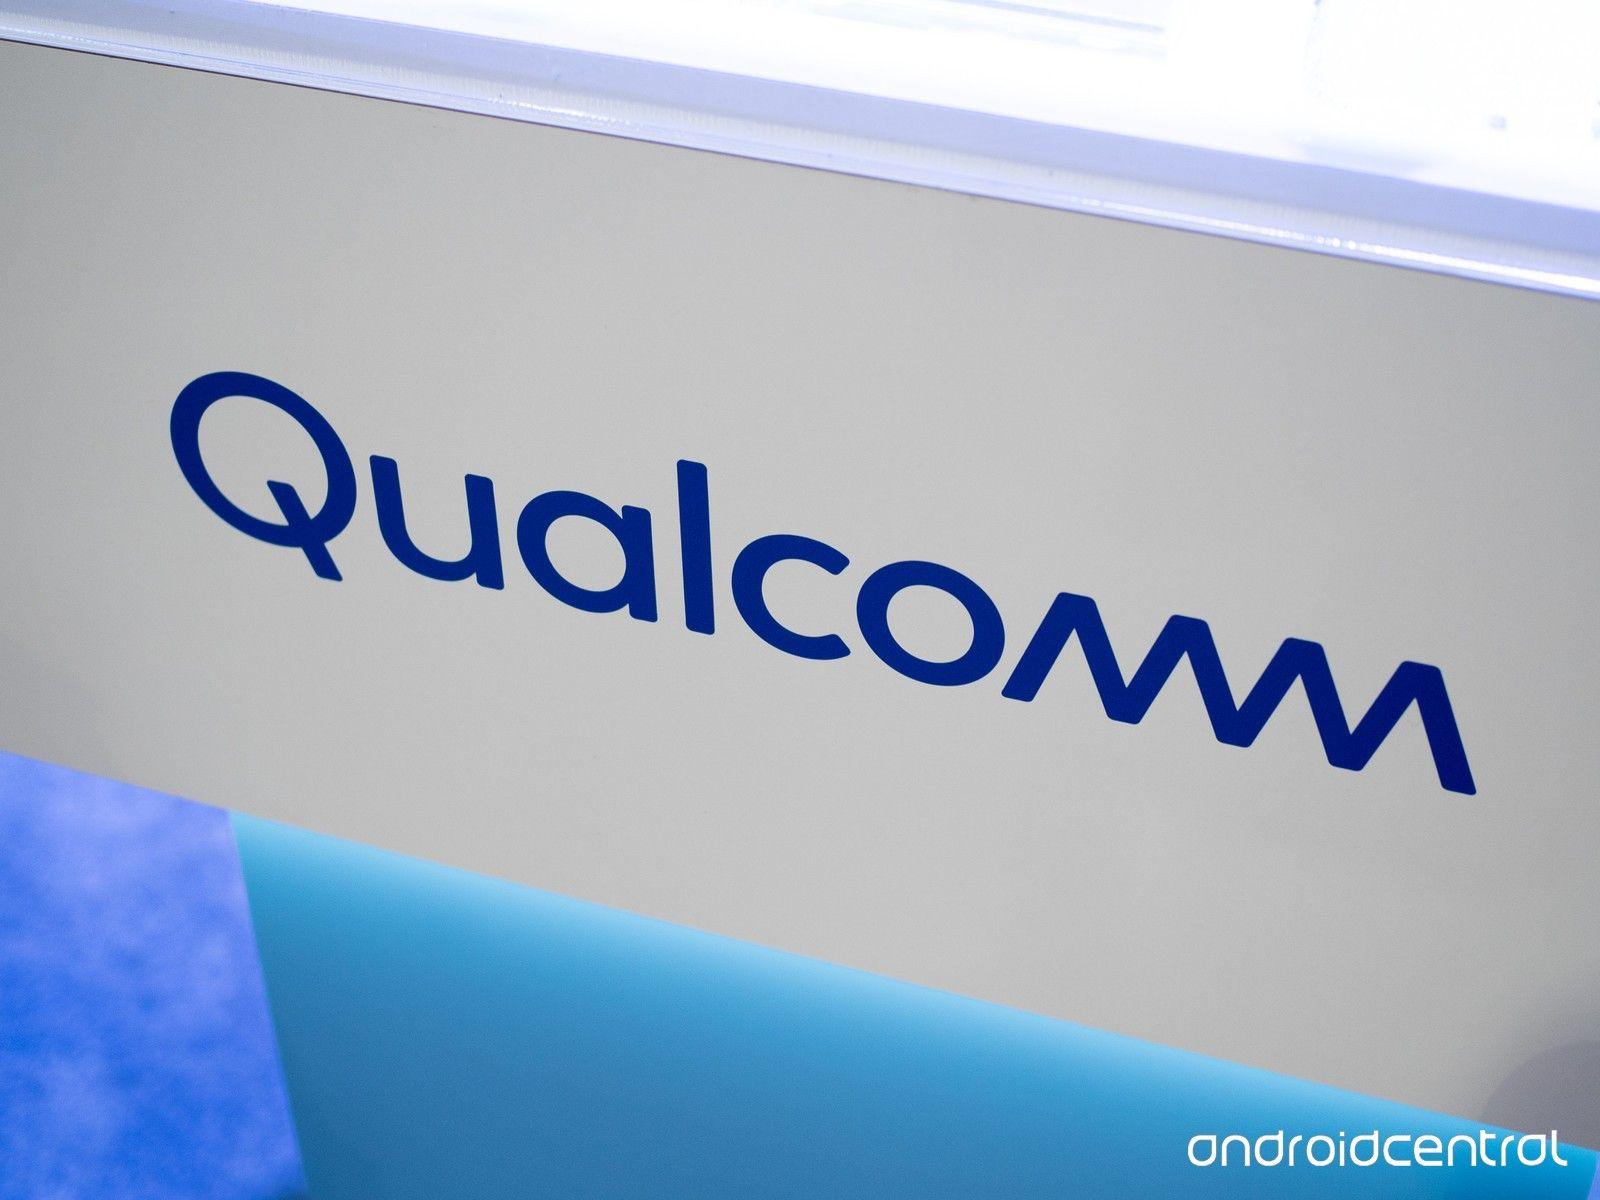 5G Qualcomm Logo - Qualcomm's simulated 5G tests show a 20x increase in download speeds